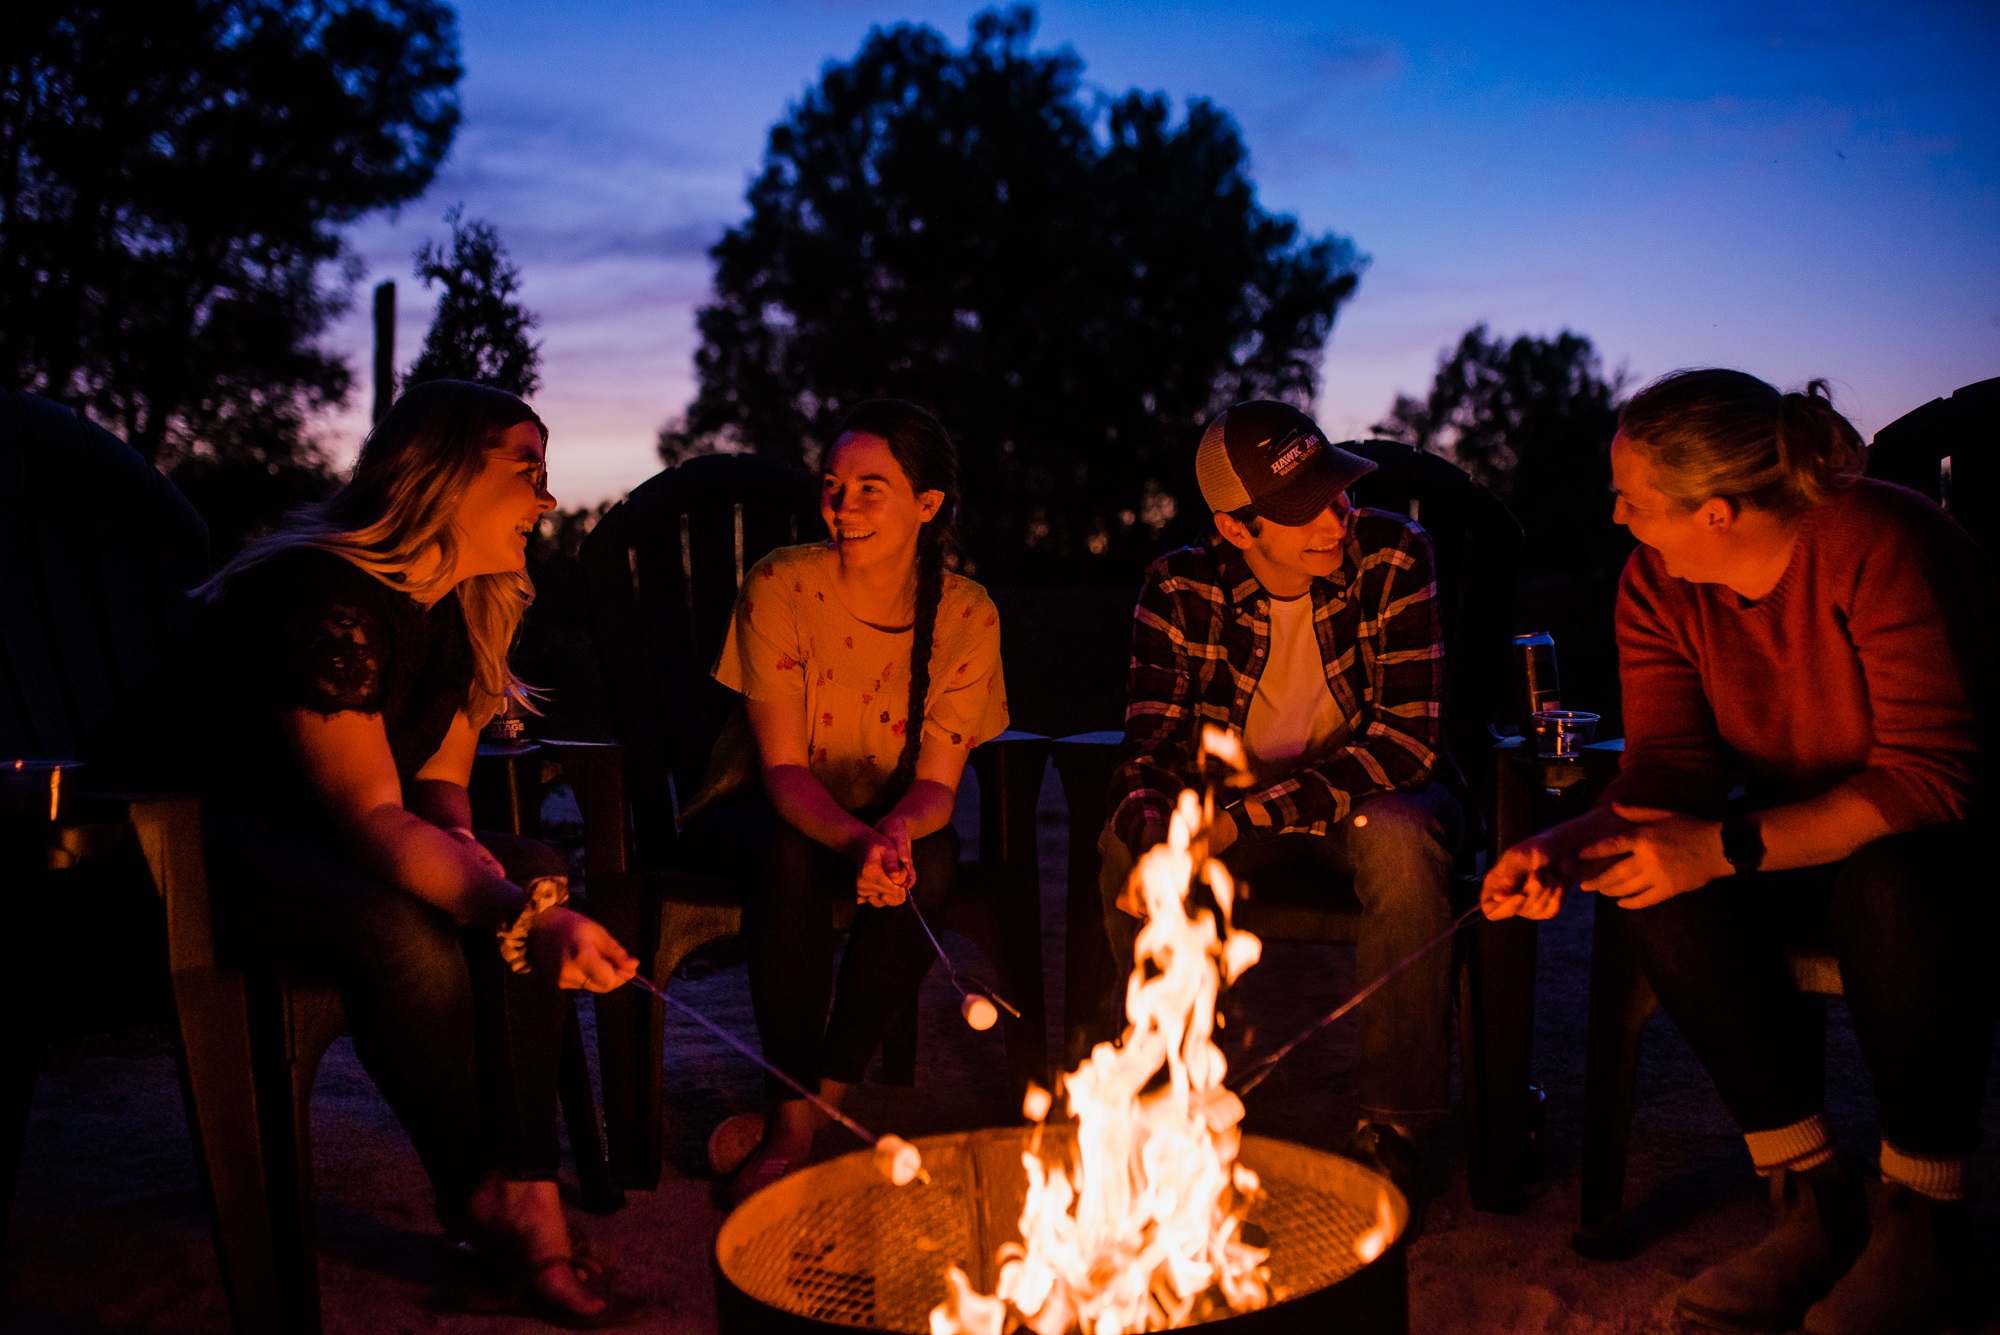 snyders campfire experience, four friends around fire